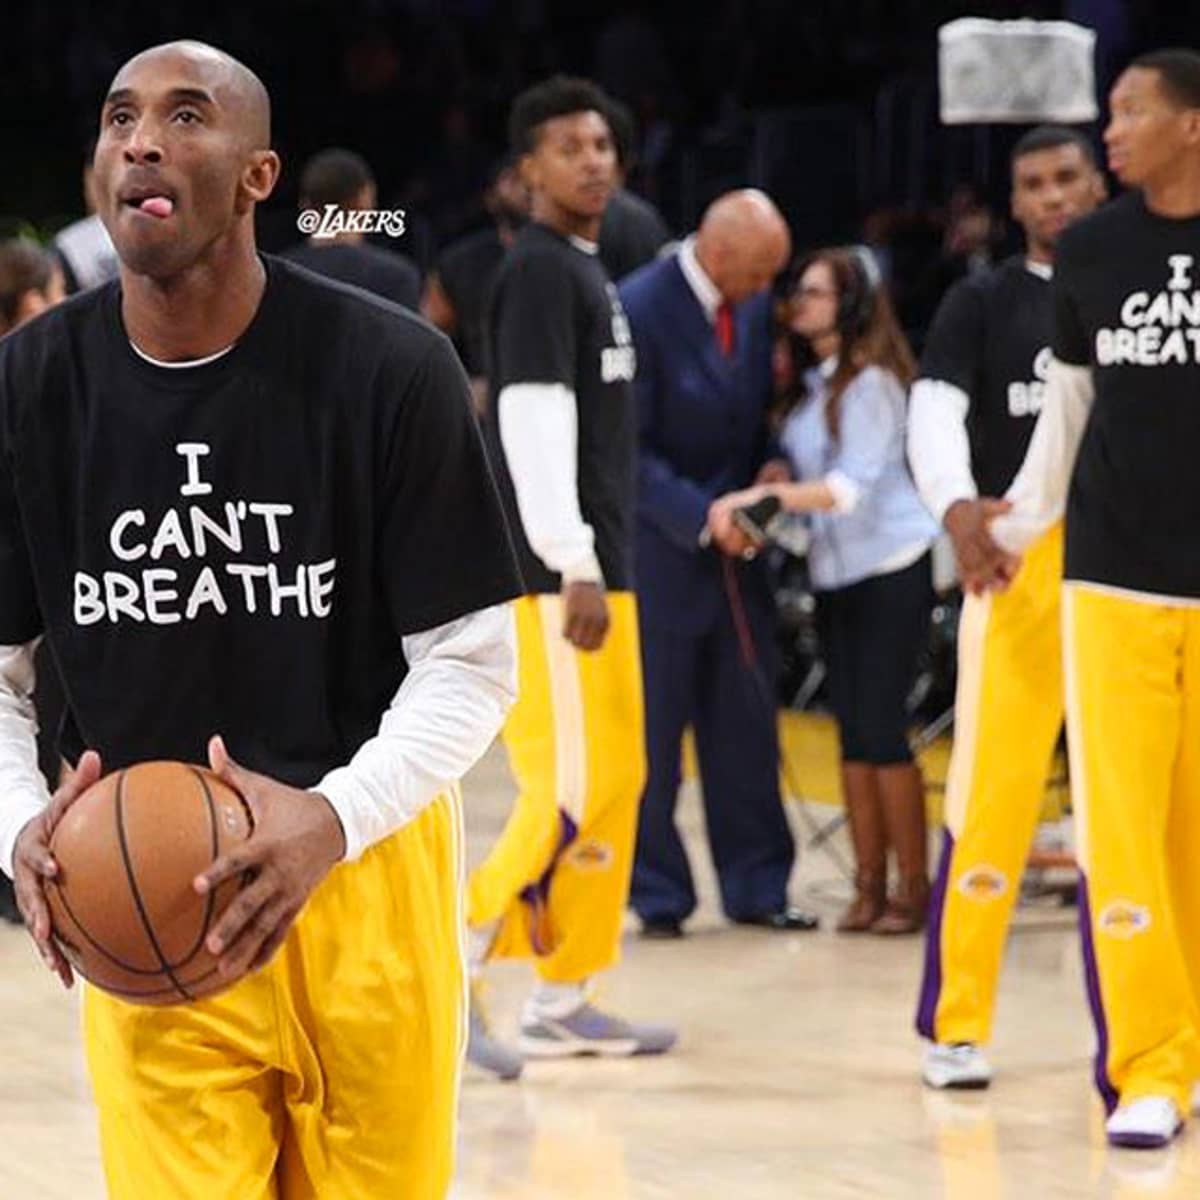 Shirt in Mouth Was a Lifelong Habit for the GOAT”: Rare Image of Kobe Bryant  Traces Back Iconic Action, Leaves Fans Amazed - EssentiallySports